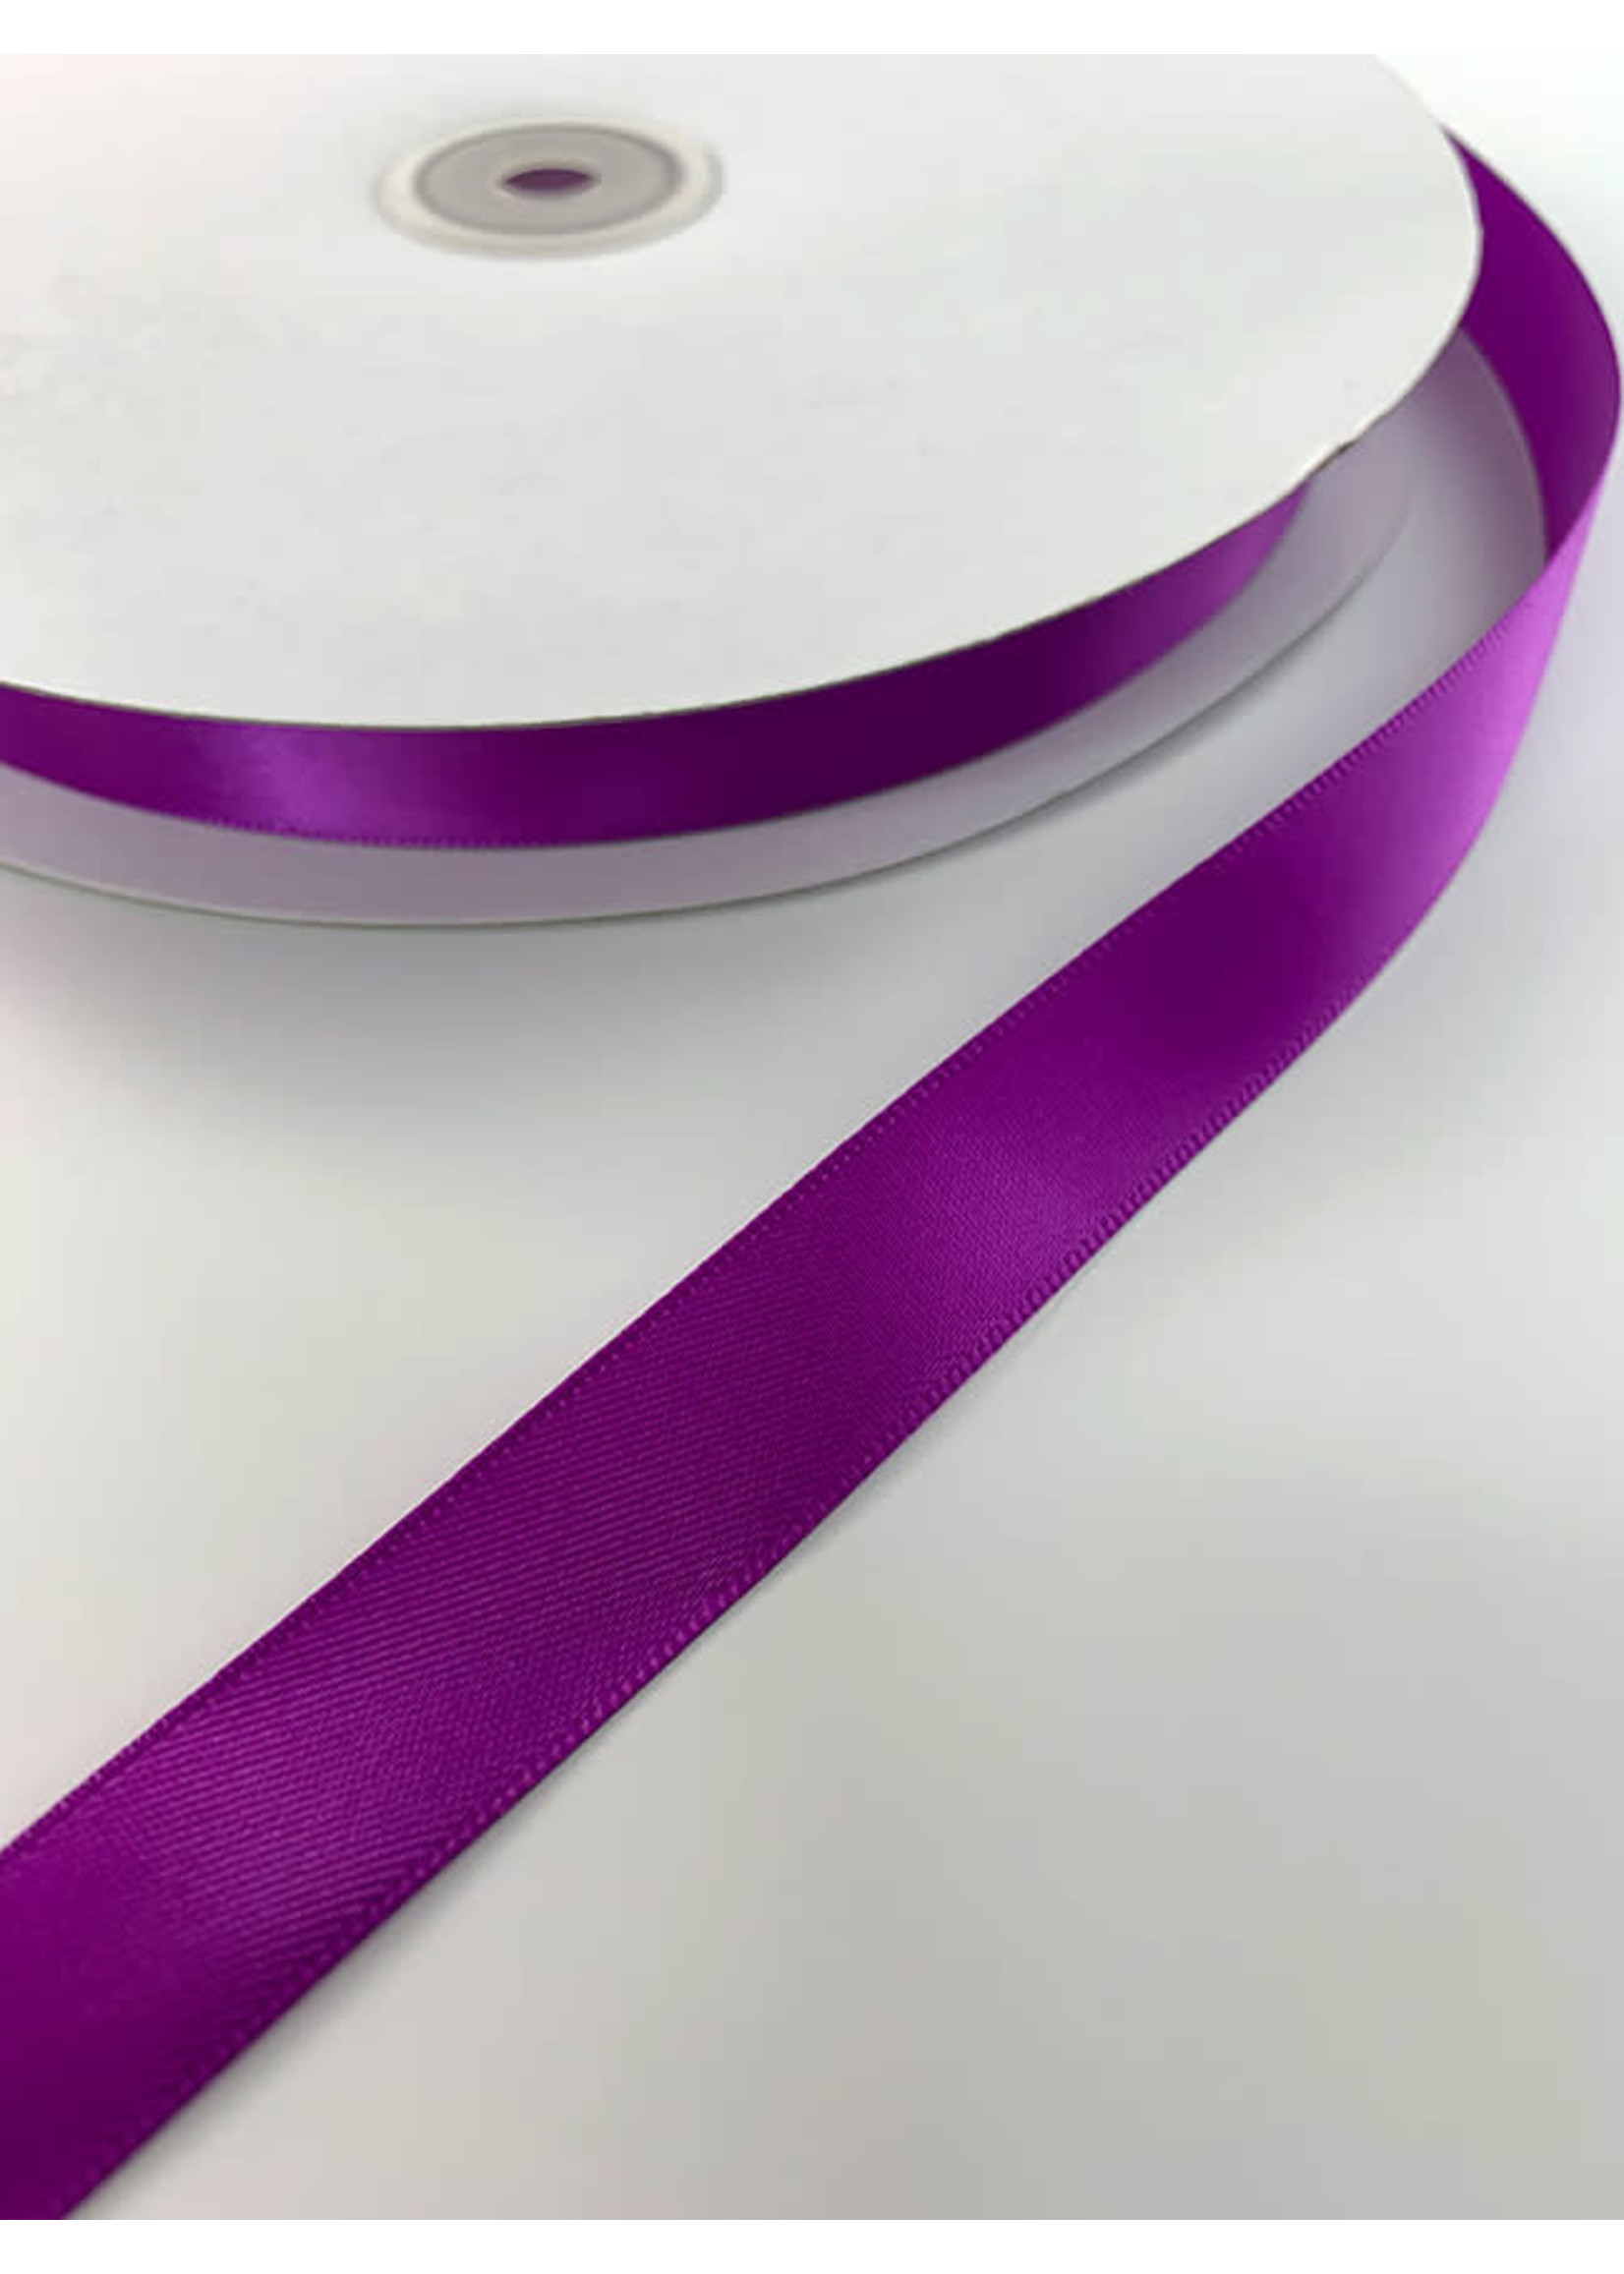 Double  Faced Satin Ribbon  - 5/8"  wide